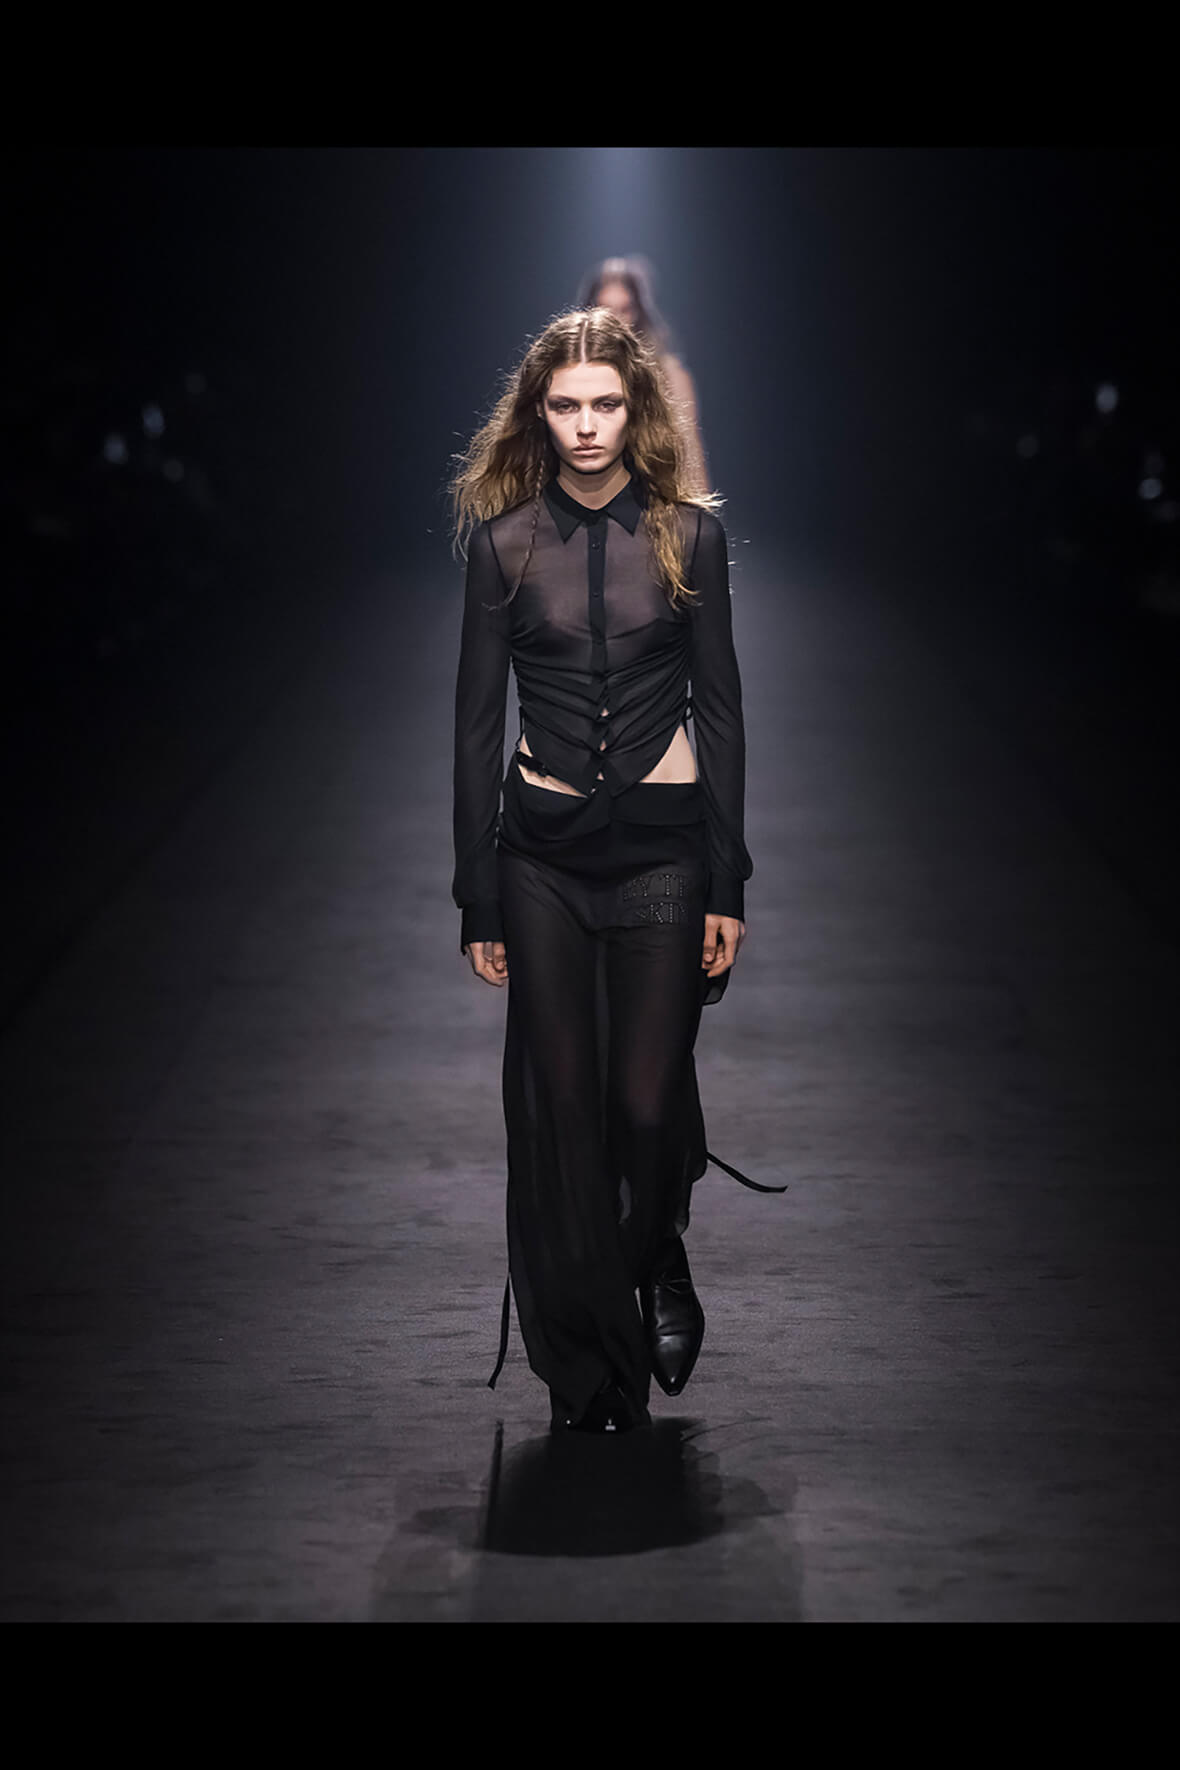 ANN DEMEULEMEESTER | COLLECTION | HOUYHNHNM（フイナム）